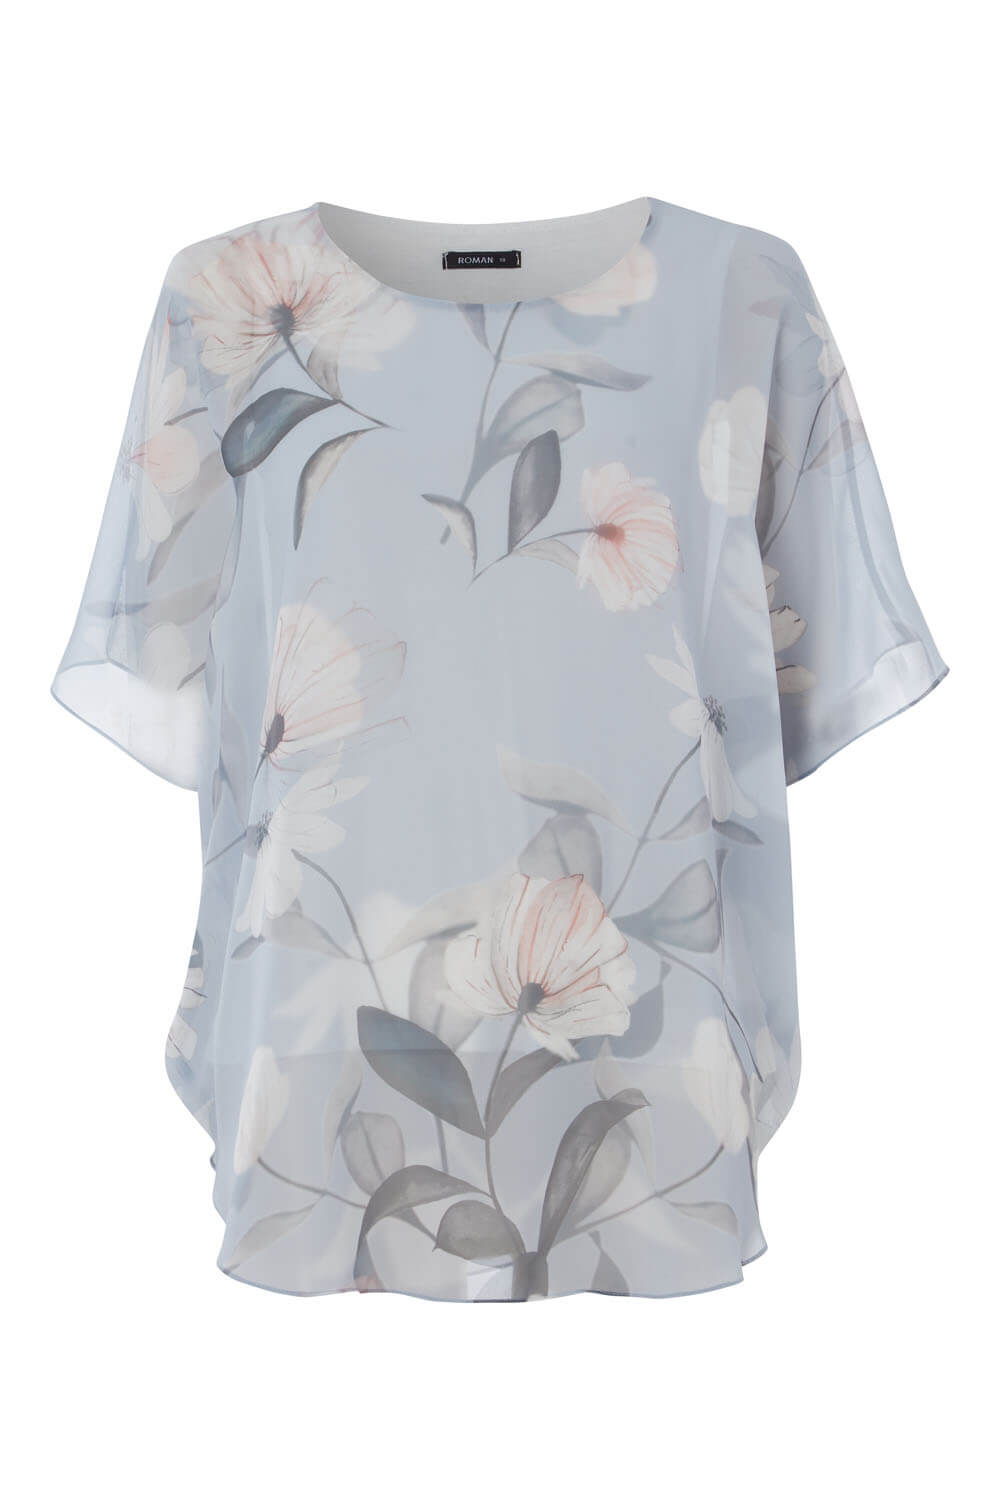 Light Grey Batwing Floral Top , Image 5 of 9